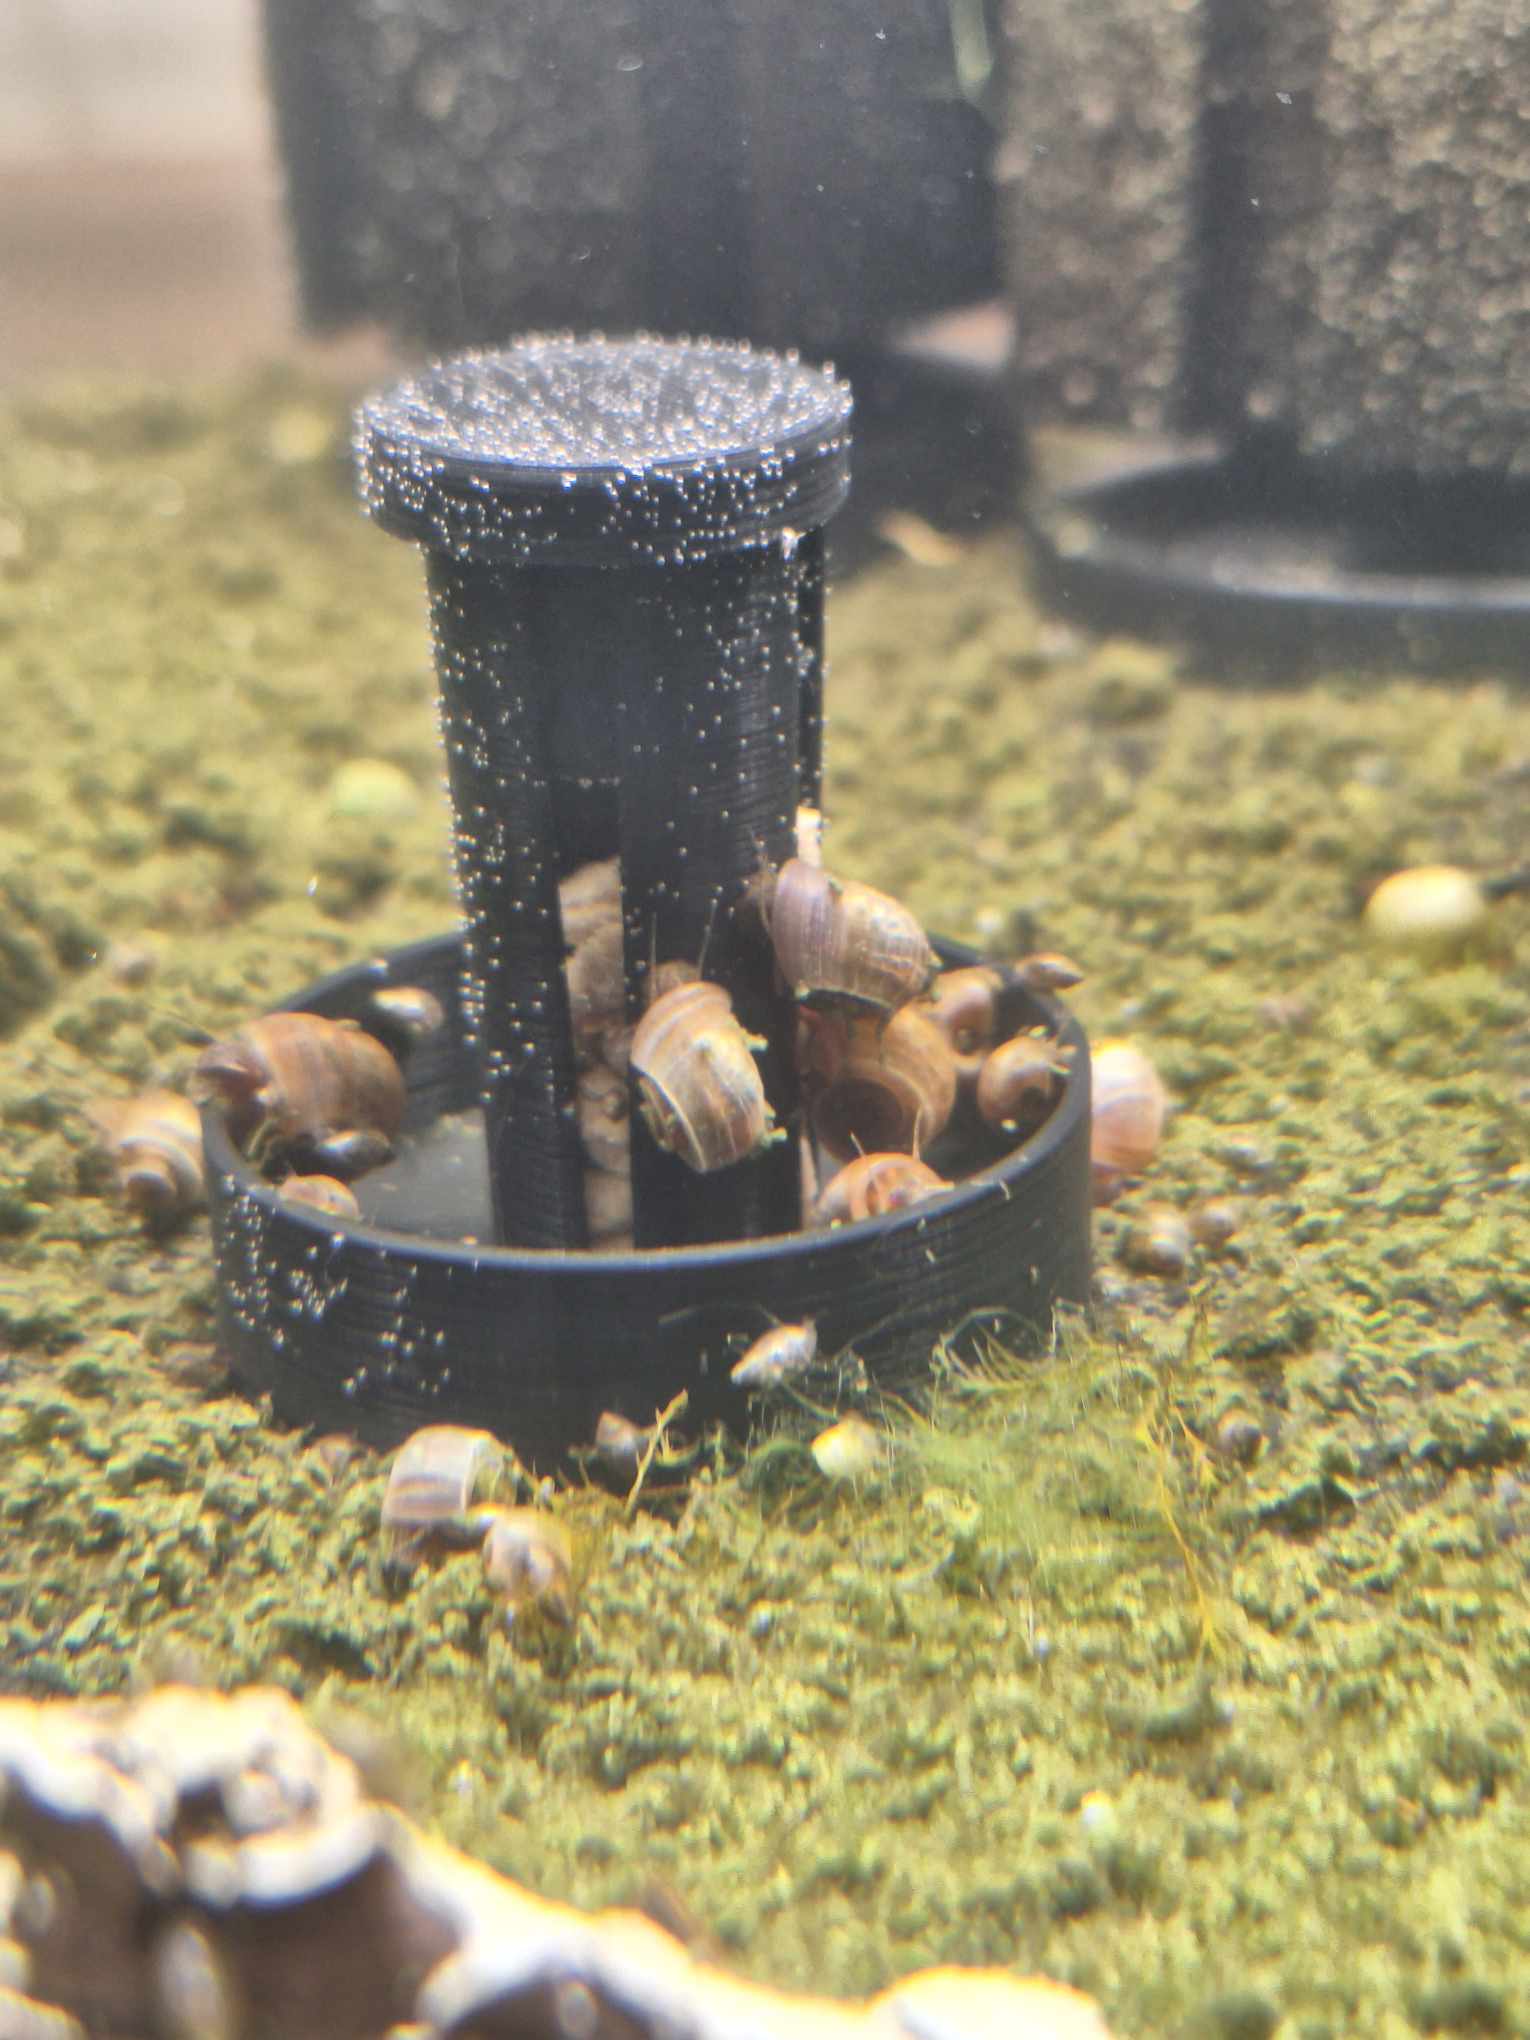 Continuation of the timelapse: Overture black PETG Snail Saver Trap with snail bait inside, as snails accumulate inside the container and climbing the bait tube with more snails on the way, set in an aquarium environment with detritus and snail waste.